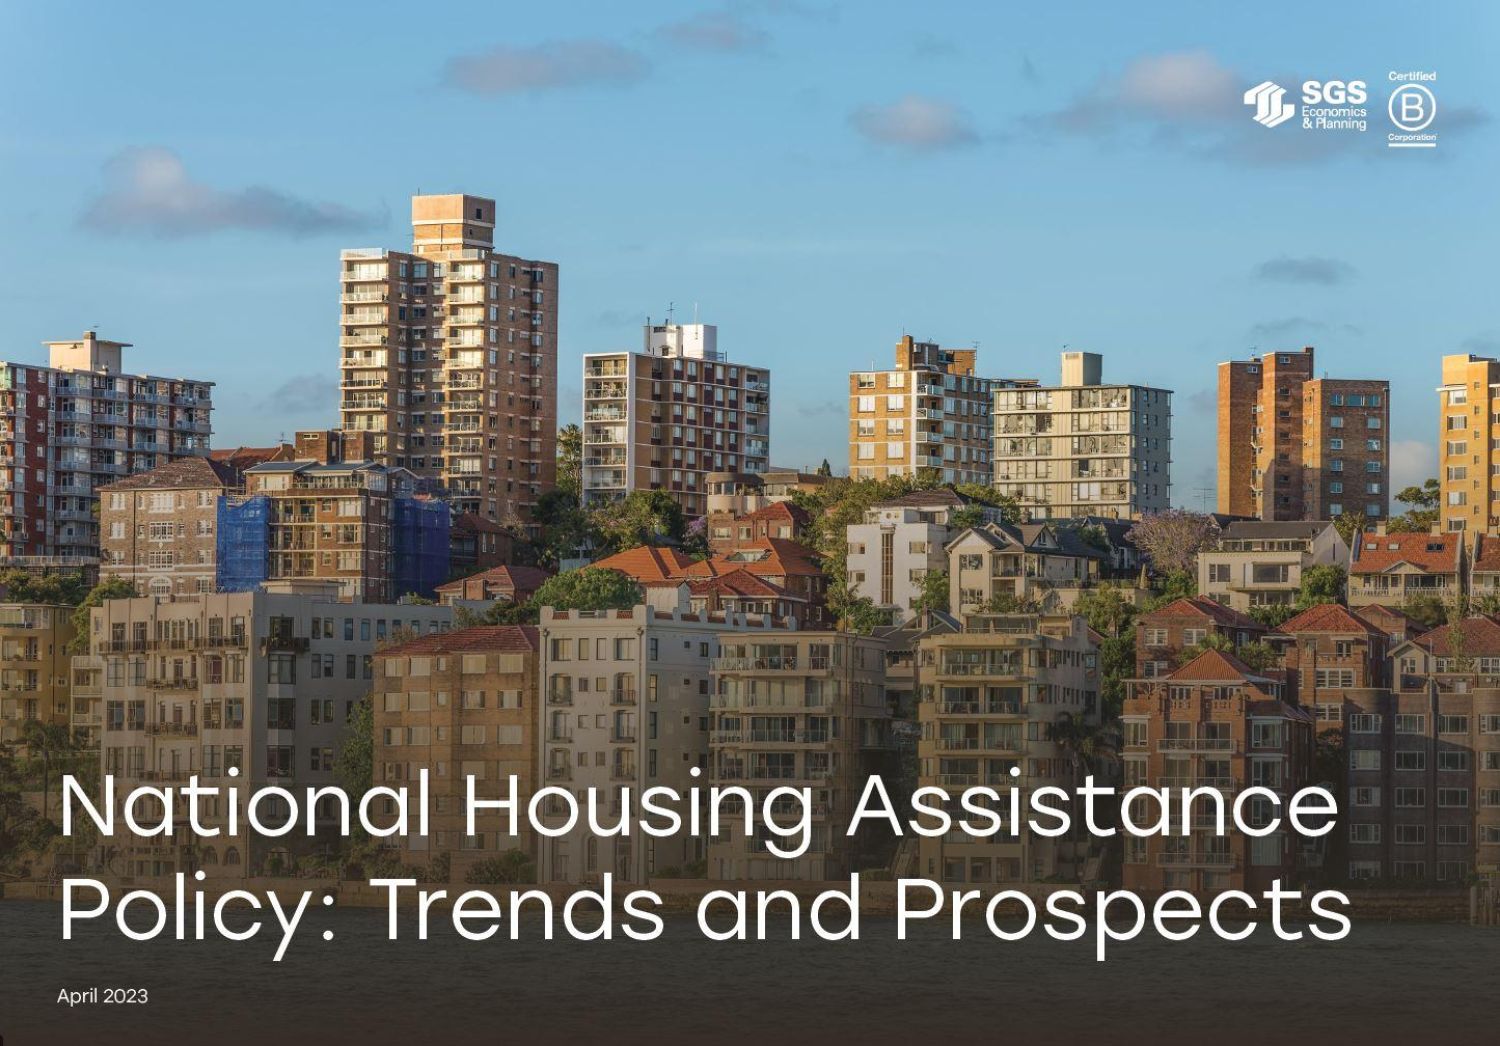 SGS Economics and Planning National Housing Policy Cover